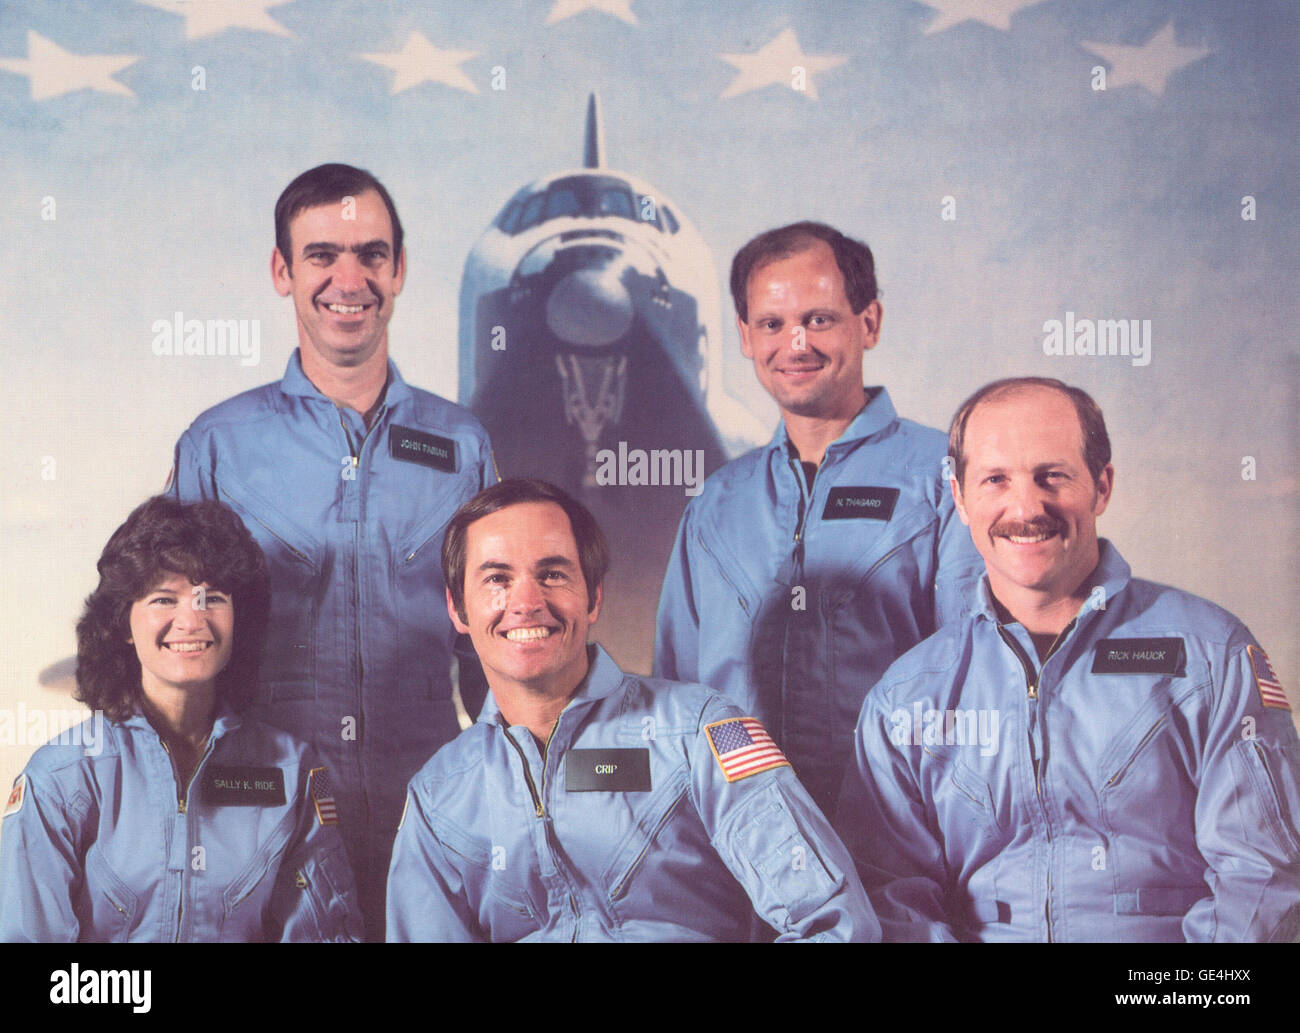 (1983) Astronauts of the STS-7/Challenger mission are left to right first row: Sally K. Ride (mission specialist), Robert L. Crippen (commander), Frederick H. Hauck (pilot); rear row: John M. Fabian (left) and Norman E. Thagard (mission specialists). STS-7 launched the first five-member crew and the first American female astronaut into space on June 18, 1983. Stock Photo